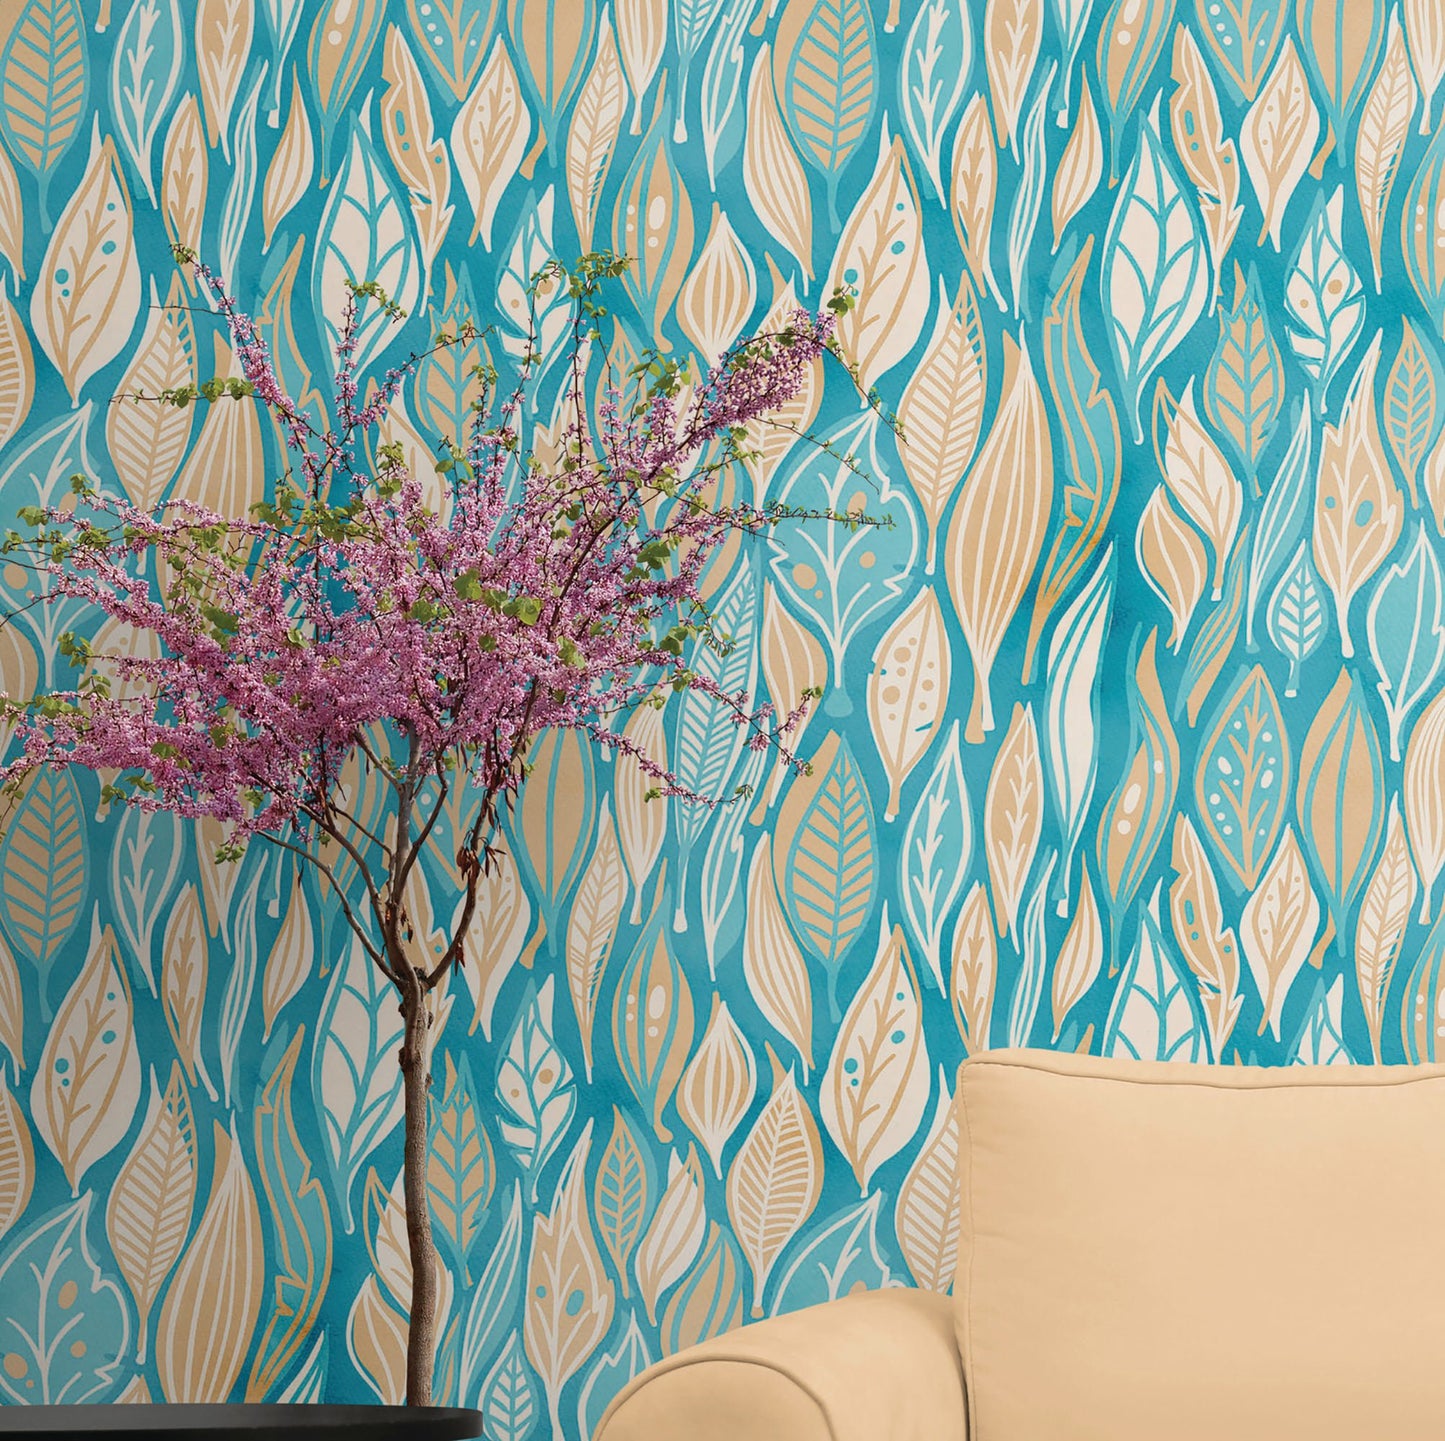 Teal Color Autumn Leaves Pattern Wall Mural. Retro Illustration Foliage Pattern. #6438